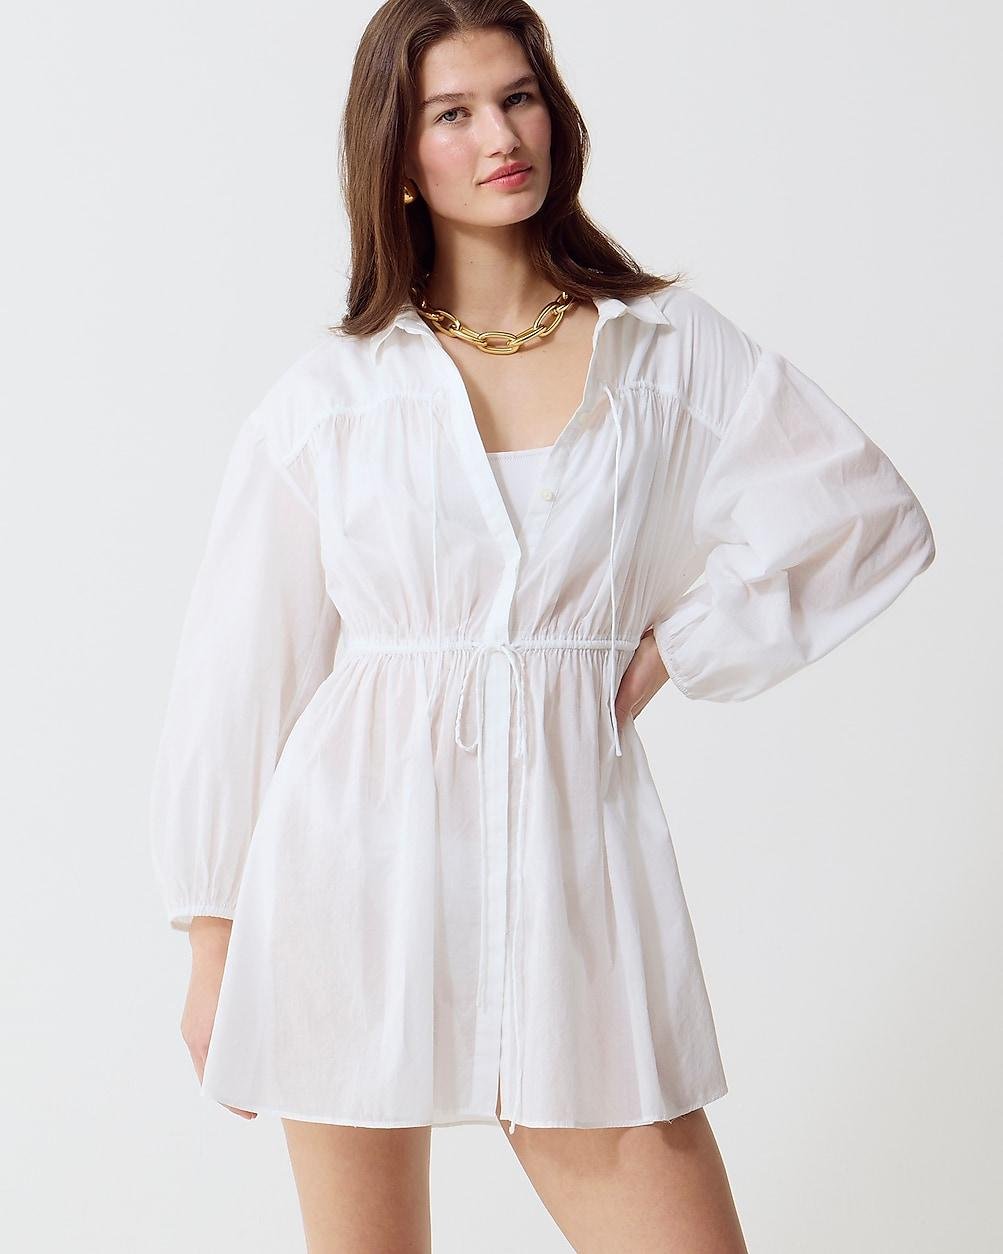 Tie-front beach shirt in cotton voile by J.CREW